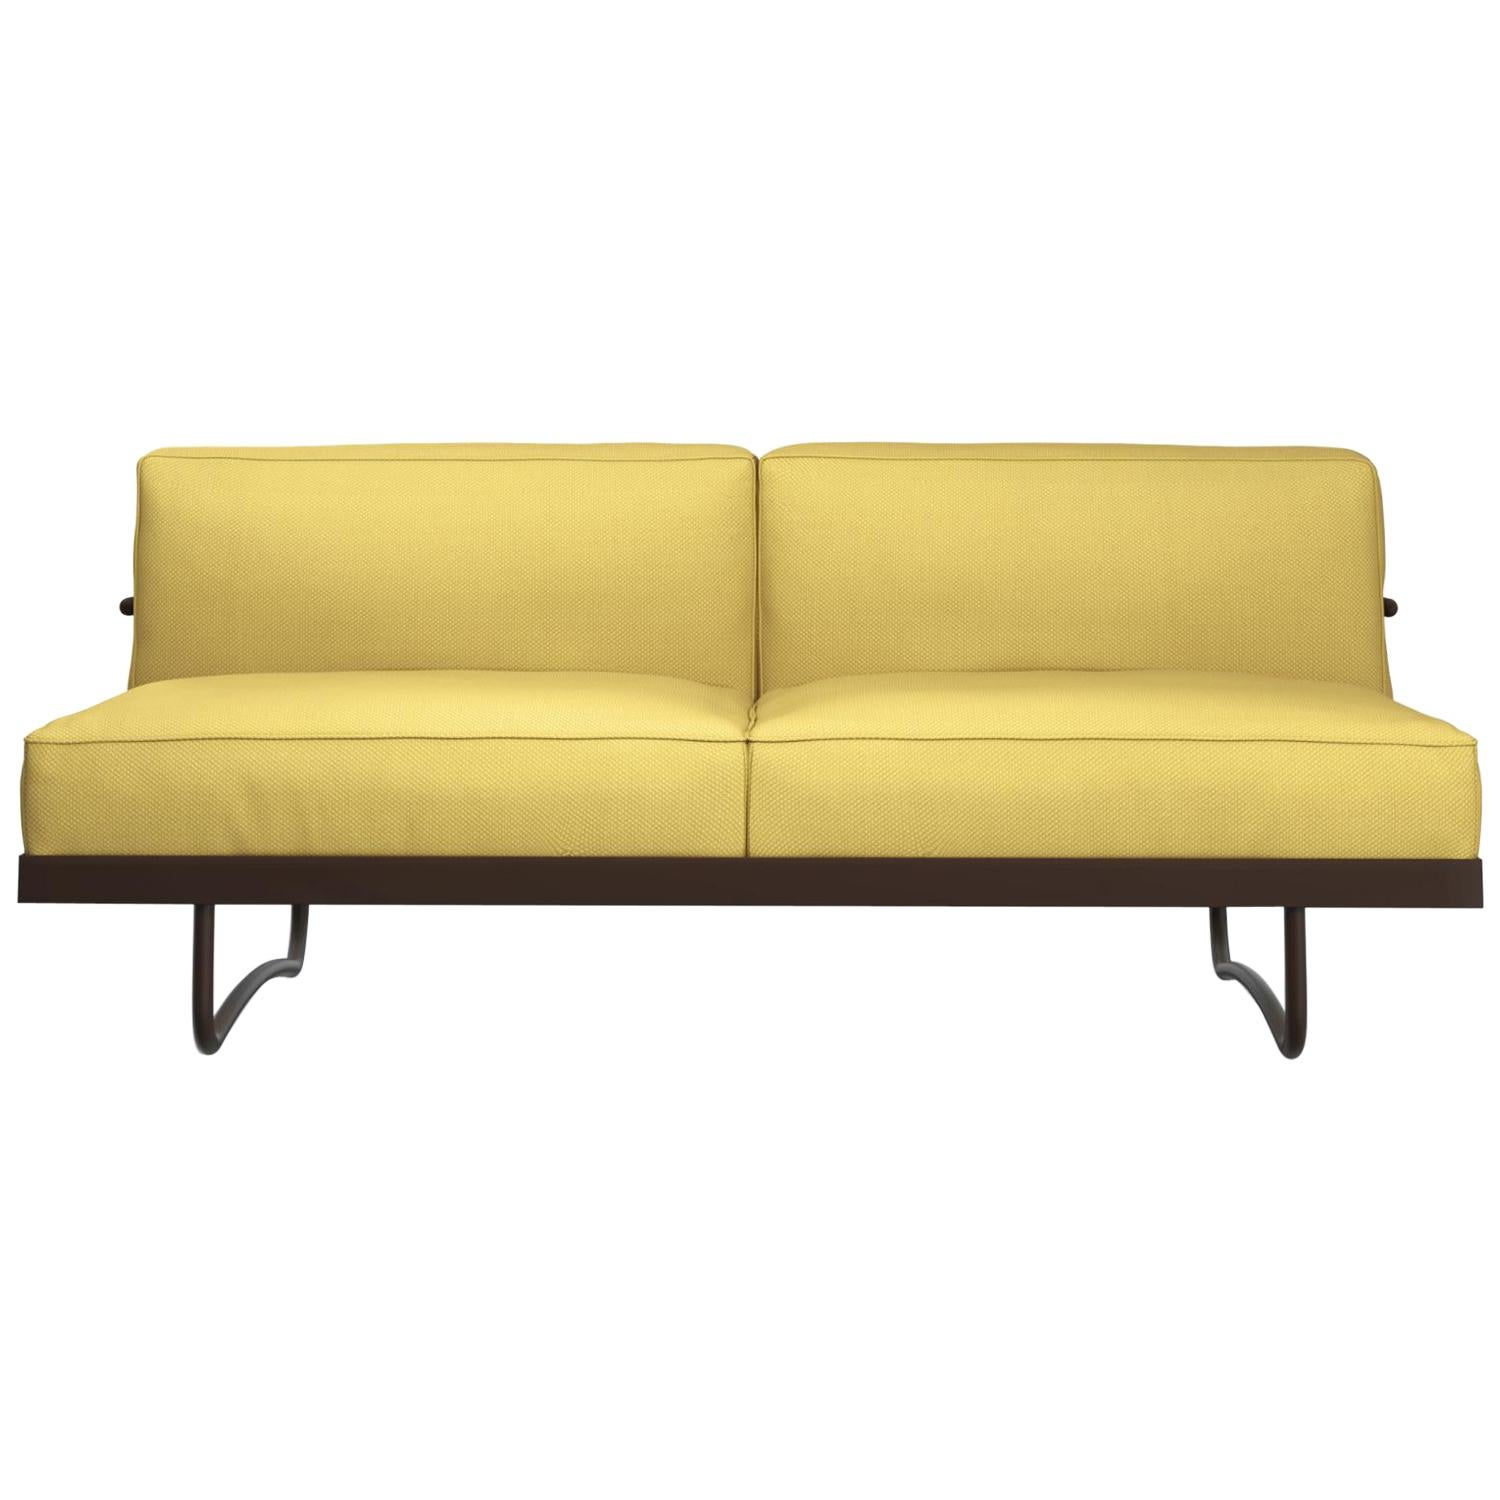 Le Corbusier, Pierre Jeanneret, Charlotte Perriand LC5 Sofa by Cassina